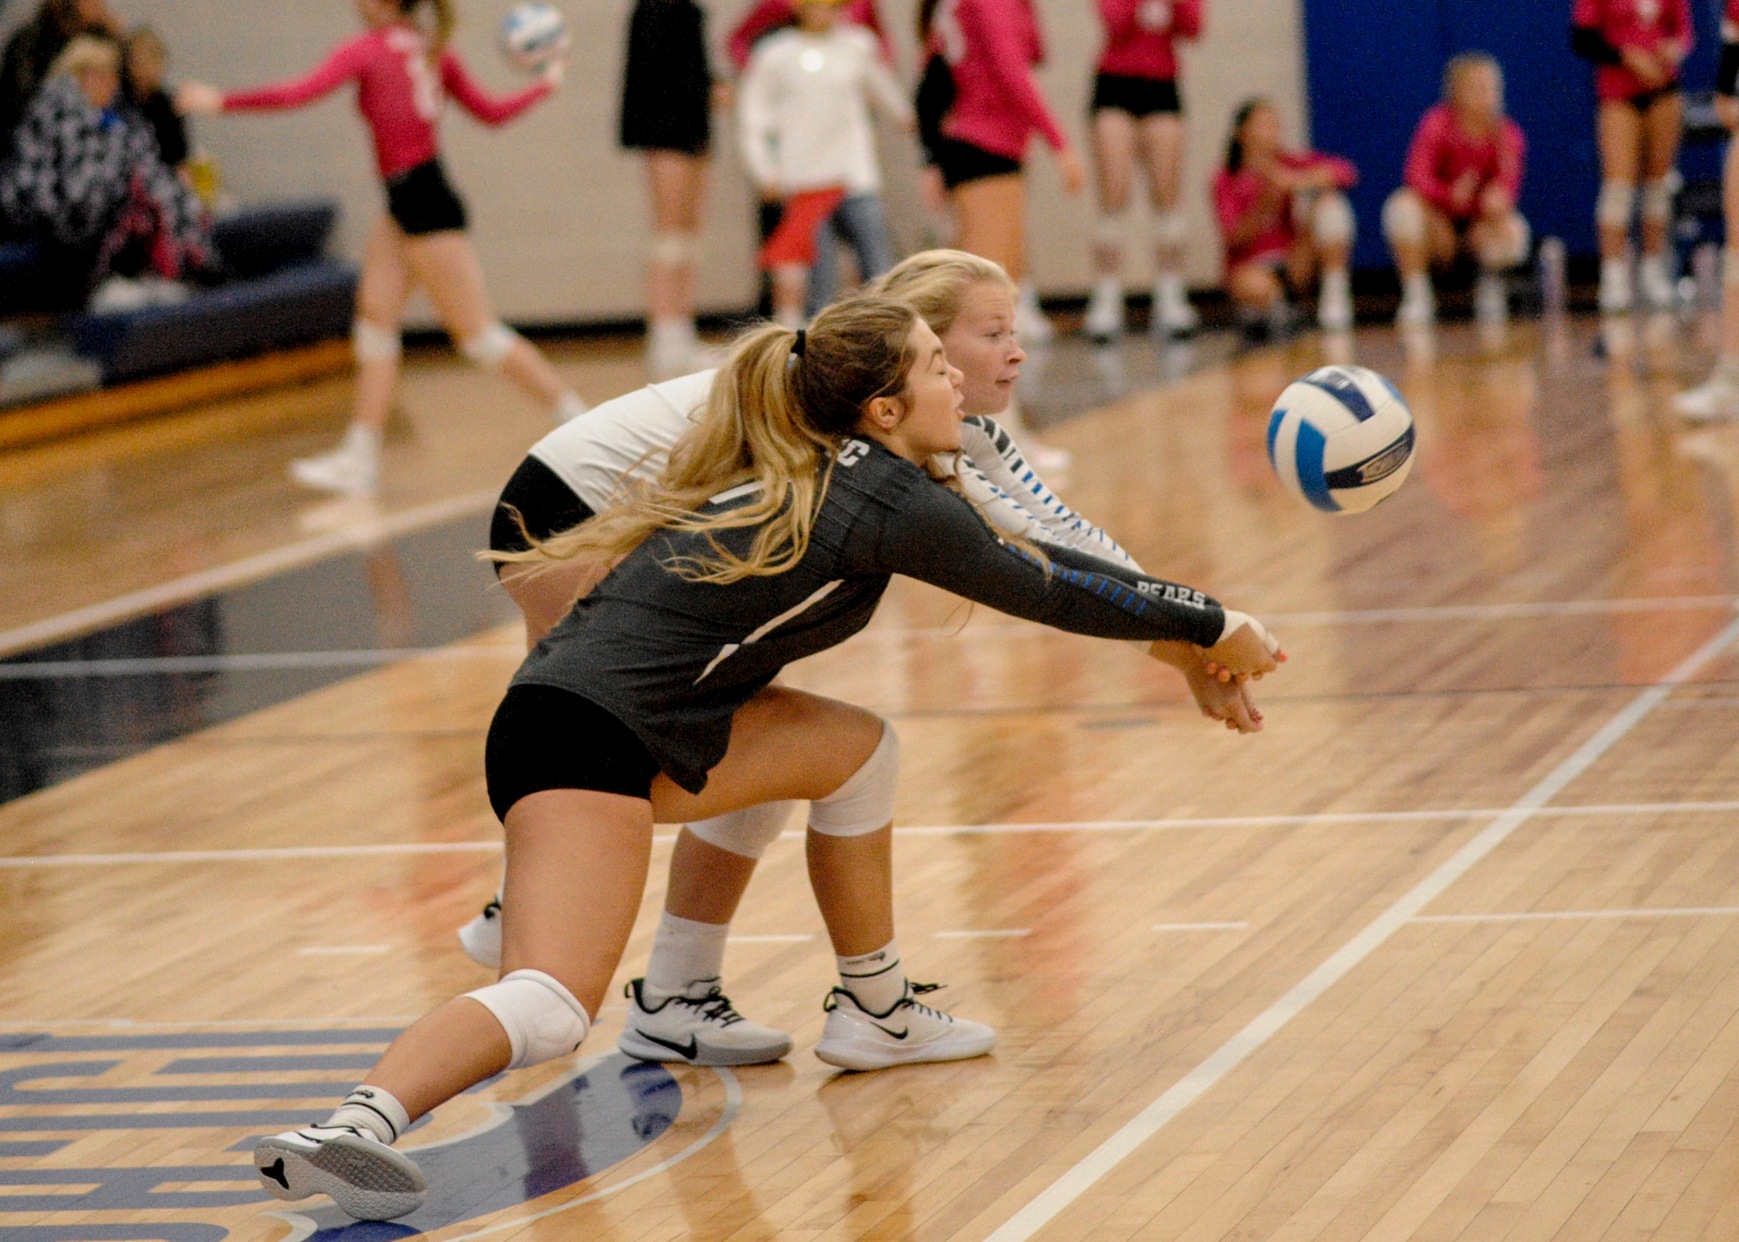 Dilsaver leads DMACC volleyball team past SECC, 3-1